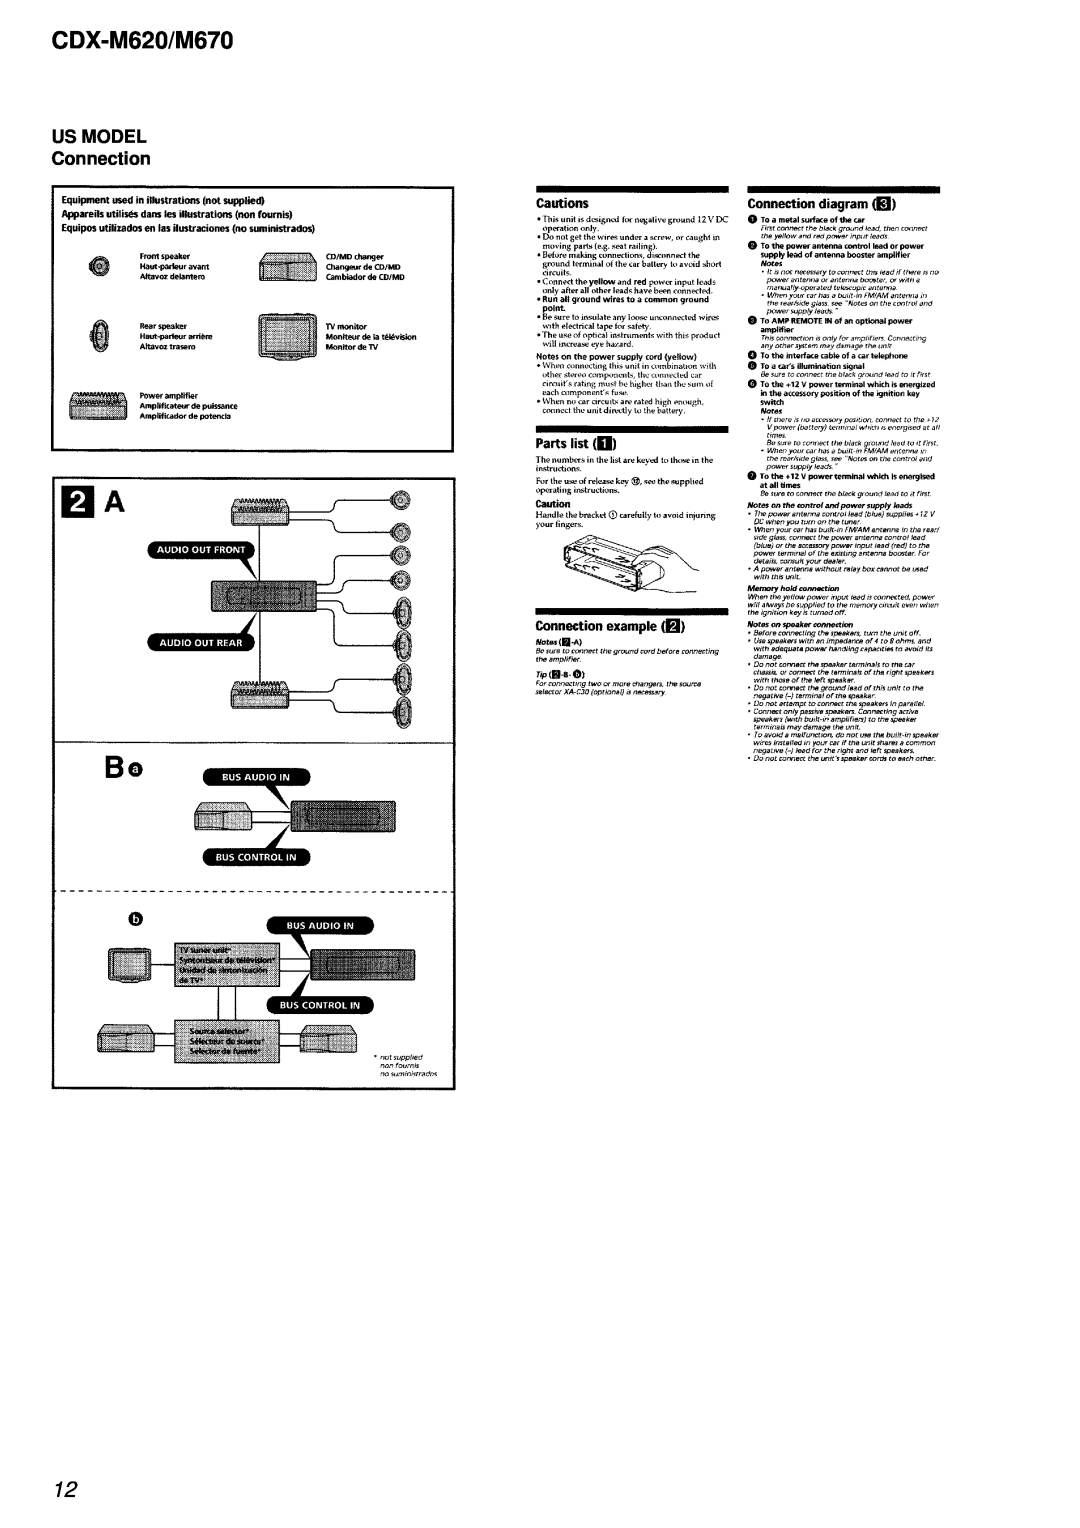 Sony Ericsson service manual US MODEL Connection, CDX-M620/M670 